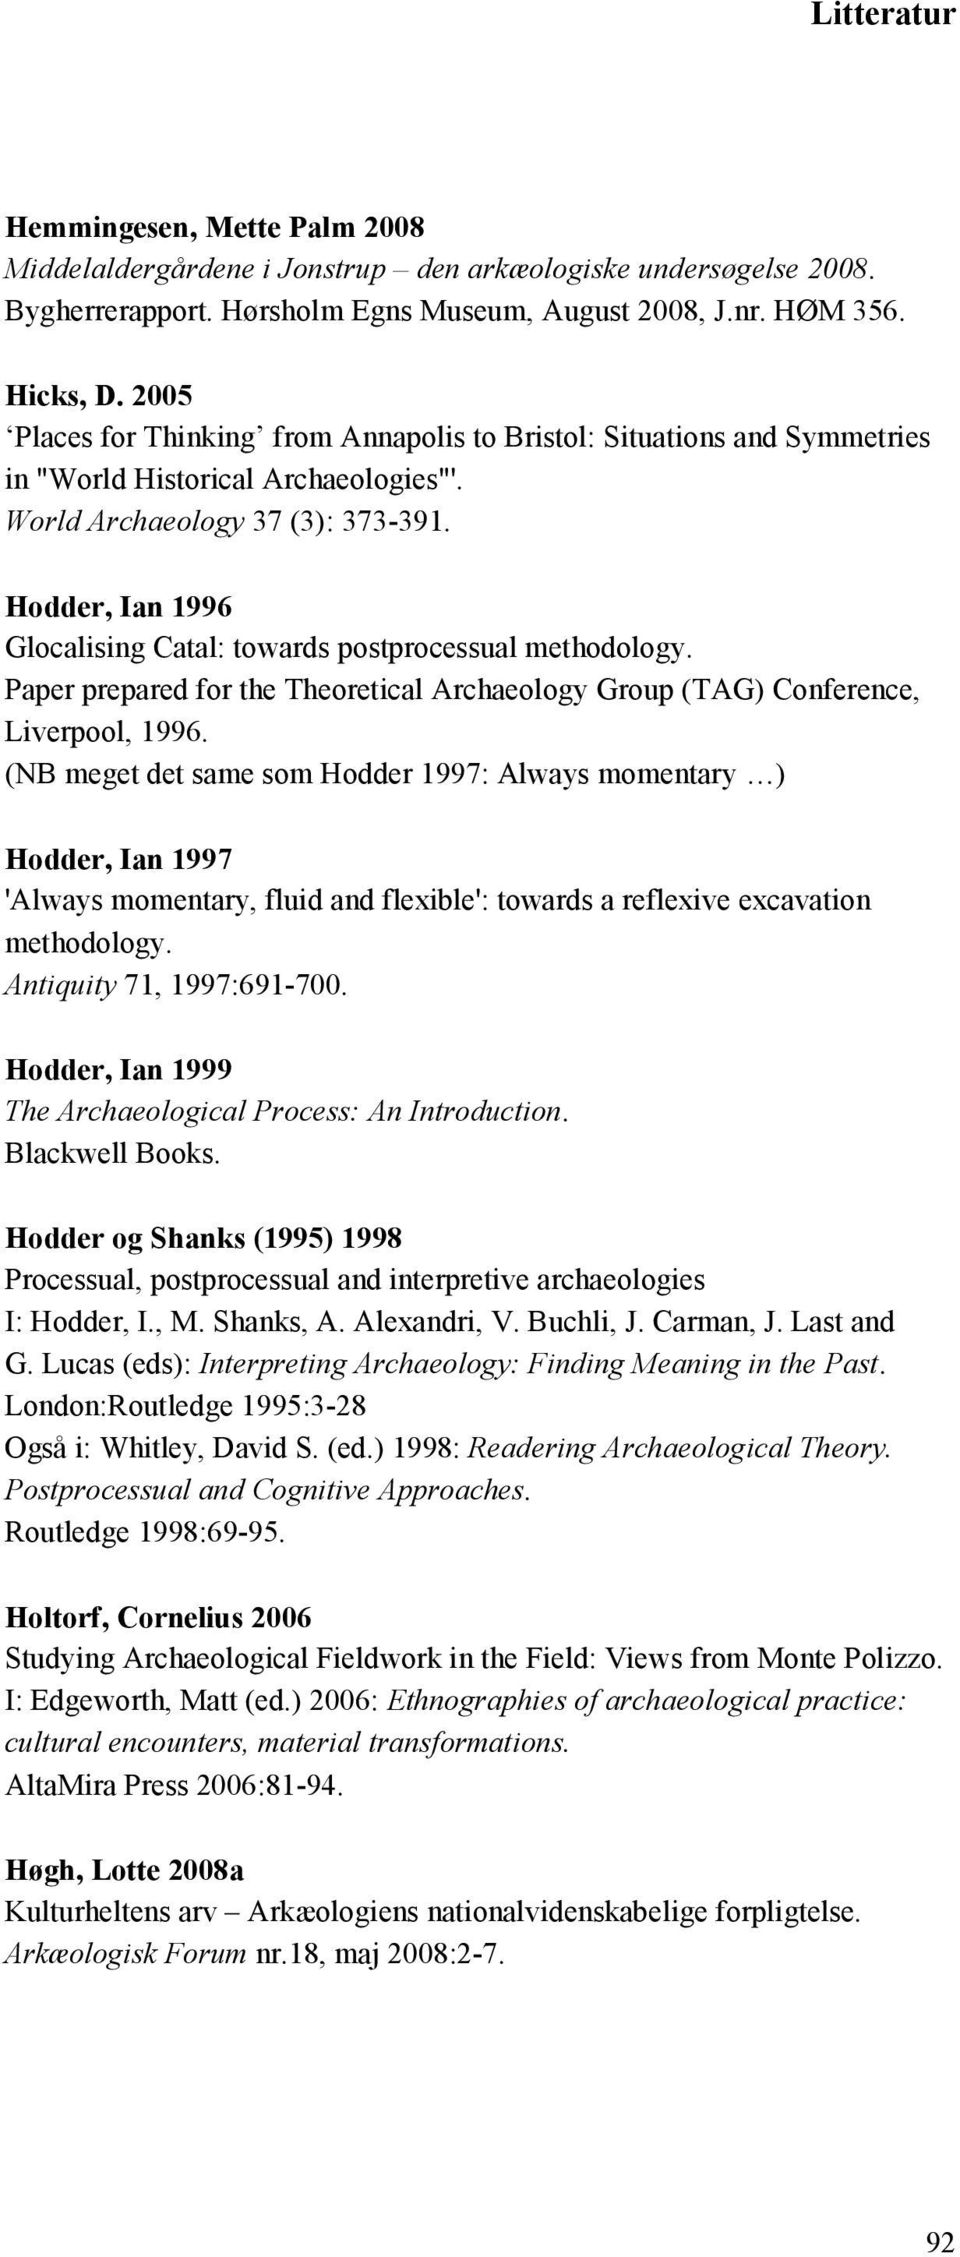 Hodder, Ian 1996 Glocalising Catal: towards postprocessual methodology. Paper prepared for the Theoretical Archaeology Group (TAG) Conference, Liverpool, 1996.